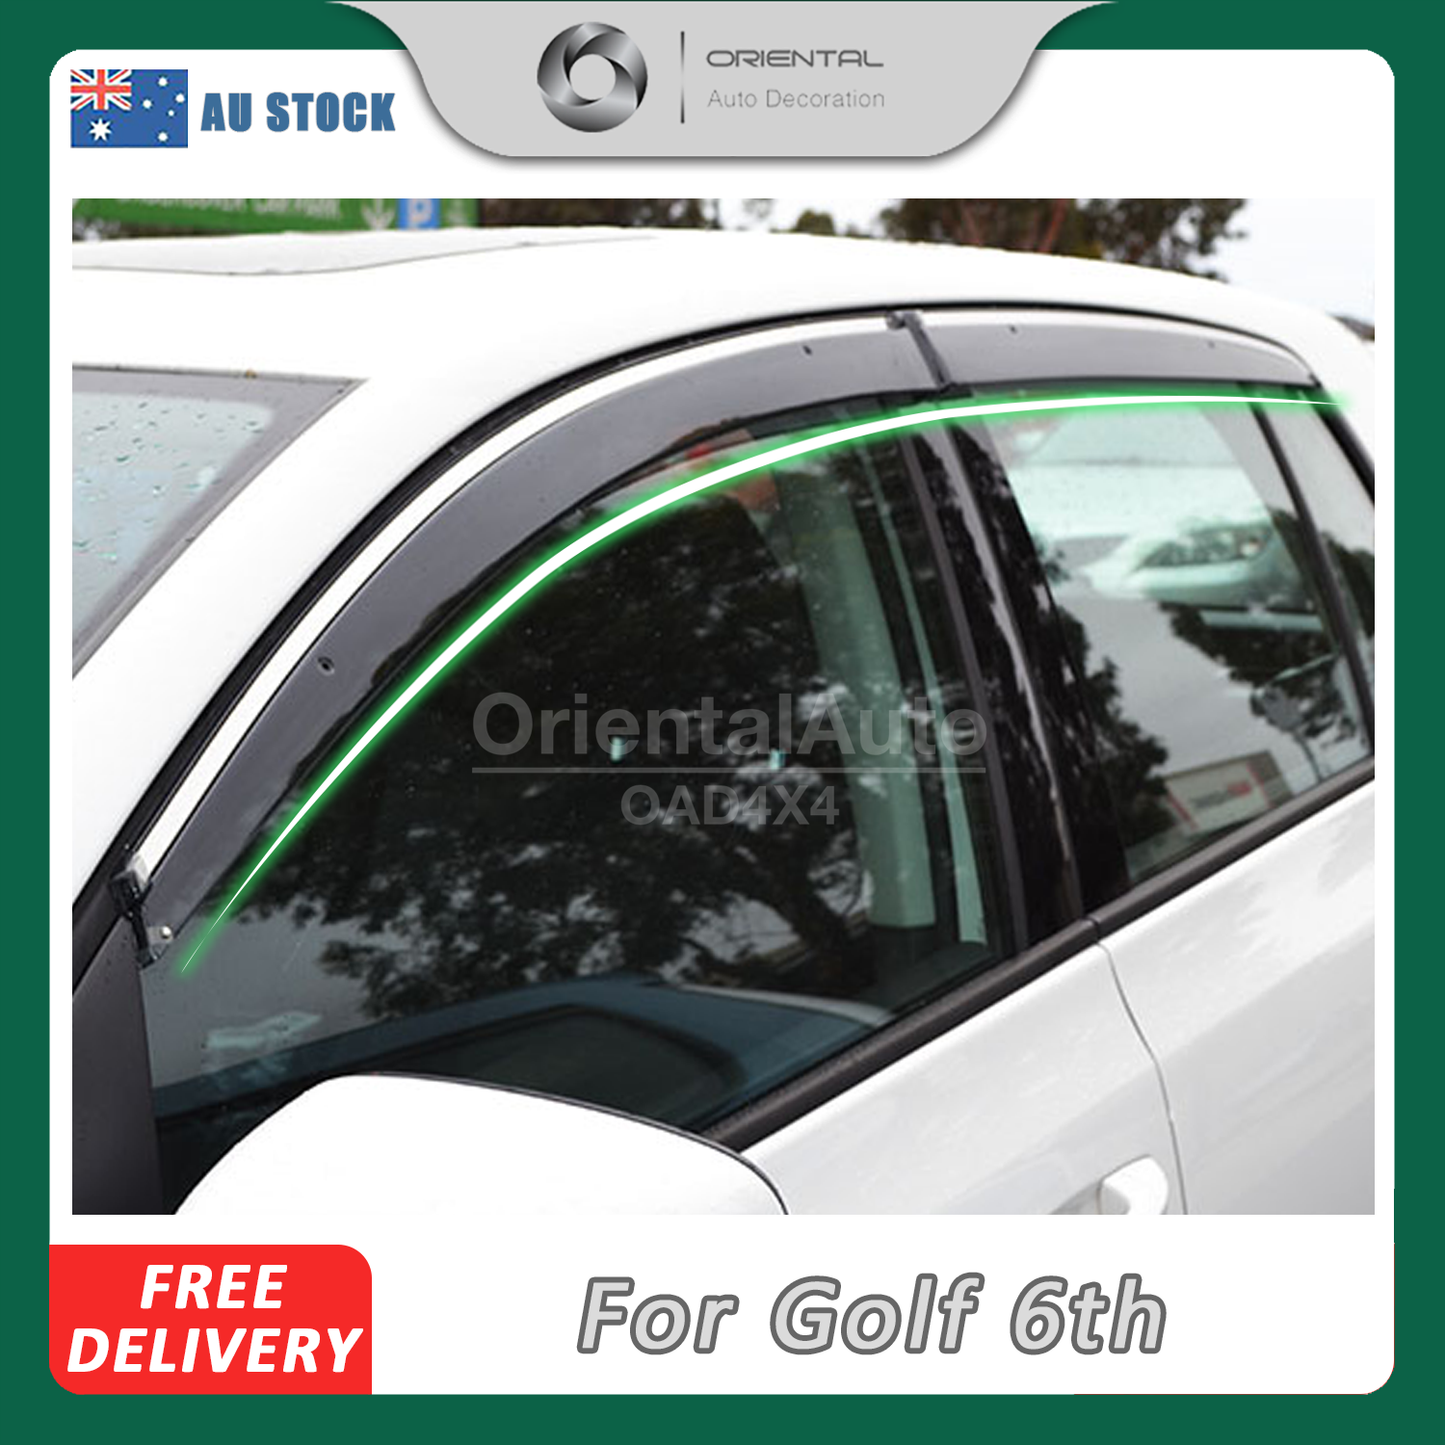 Injection Stainless Weathershields For Volkswagen Golf 6th 2009-2013 MK6 Weather Shields Window Visor